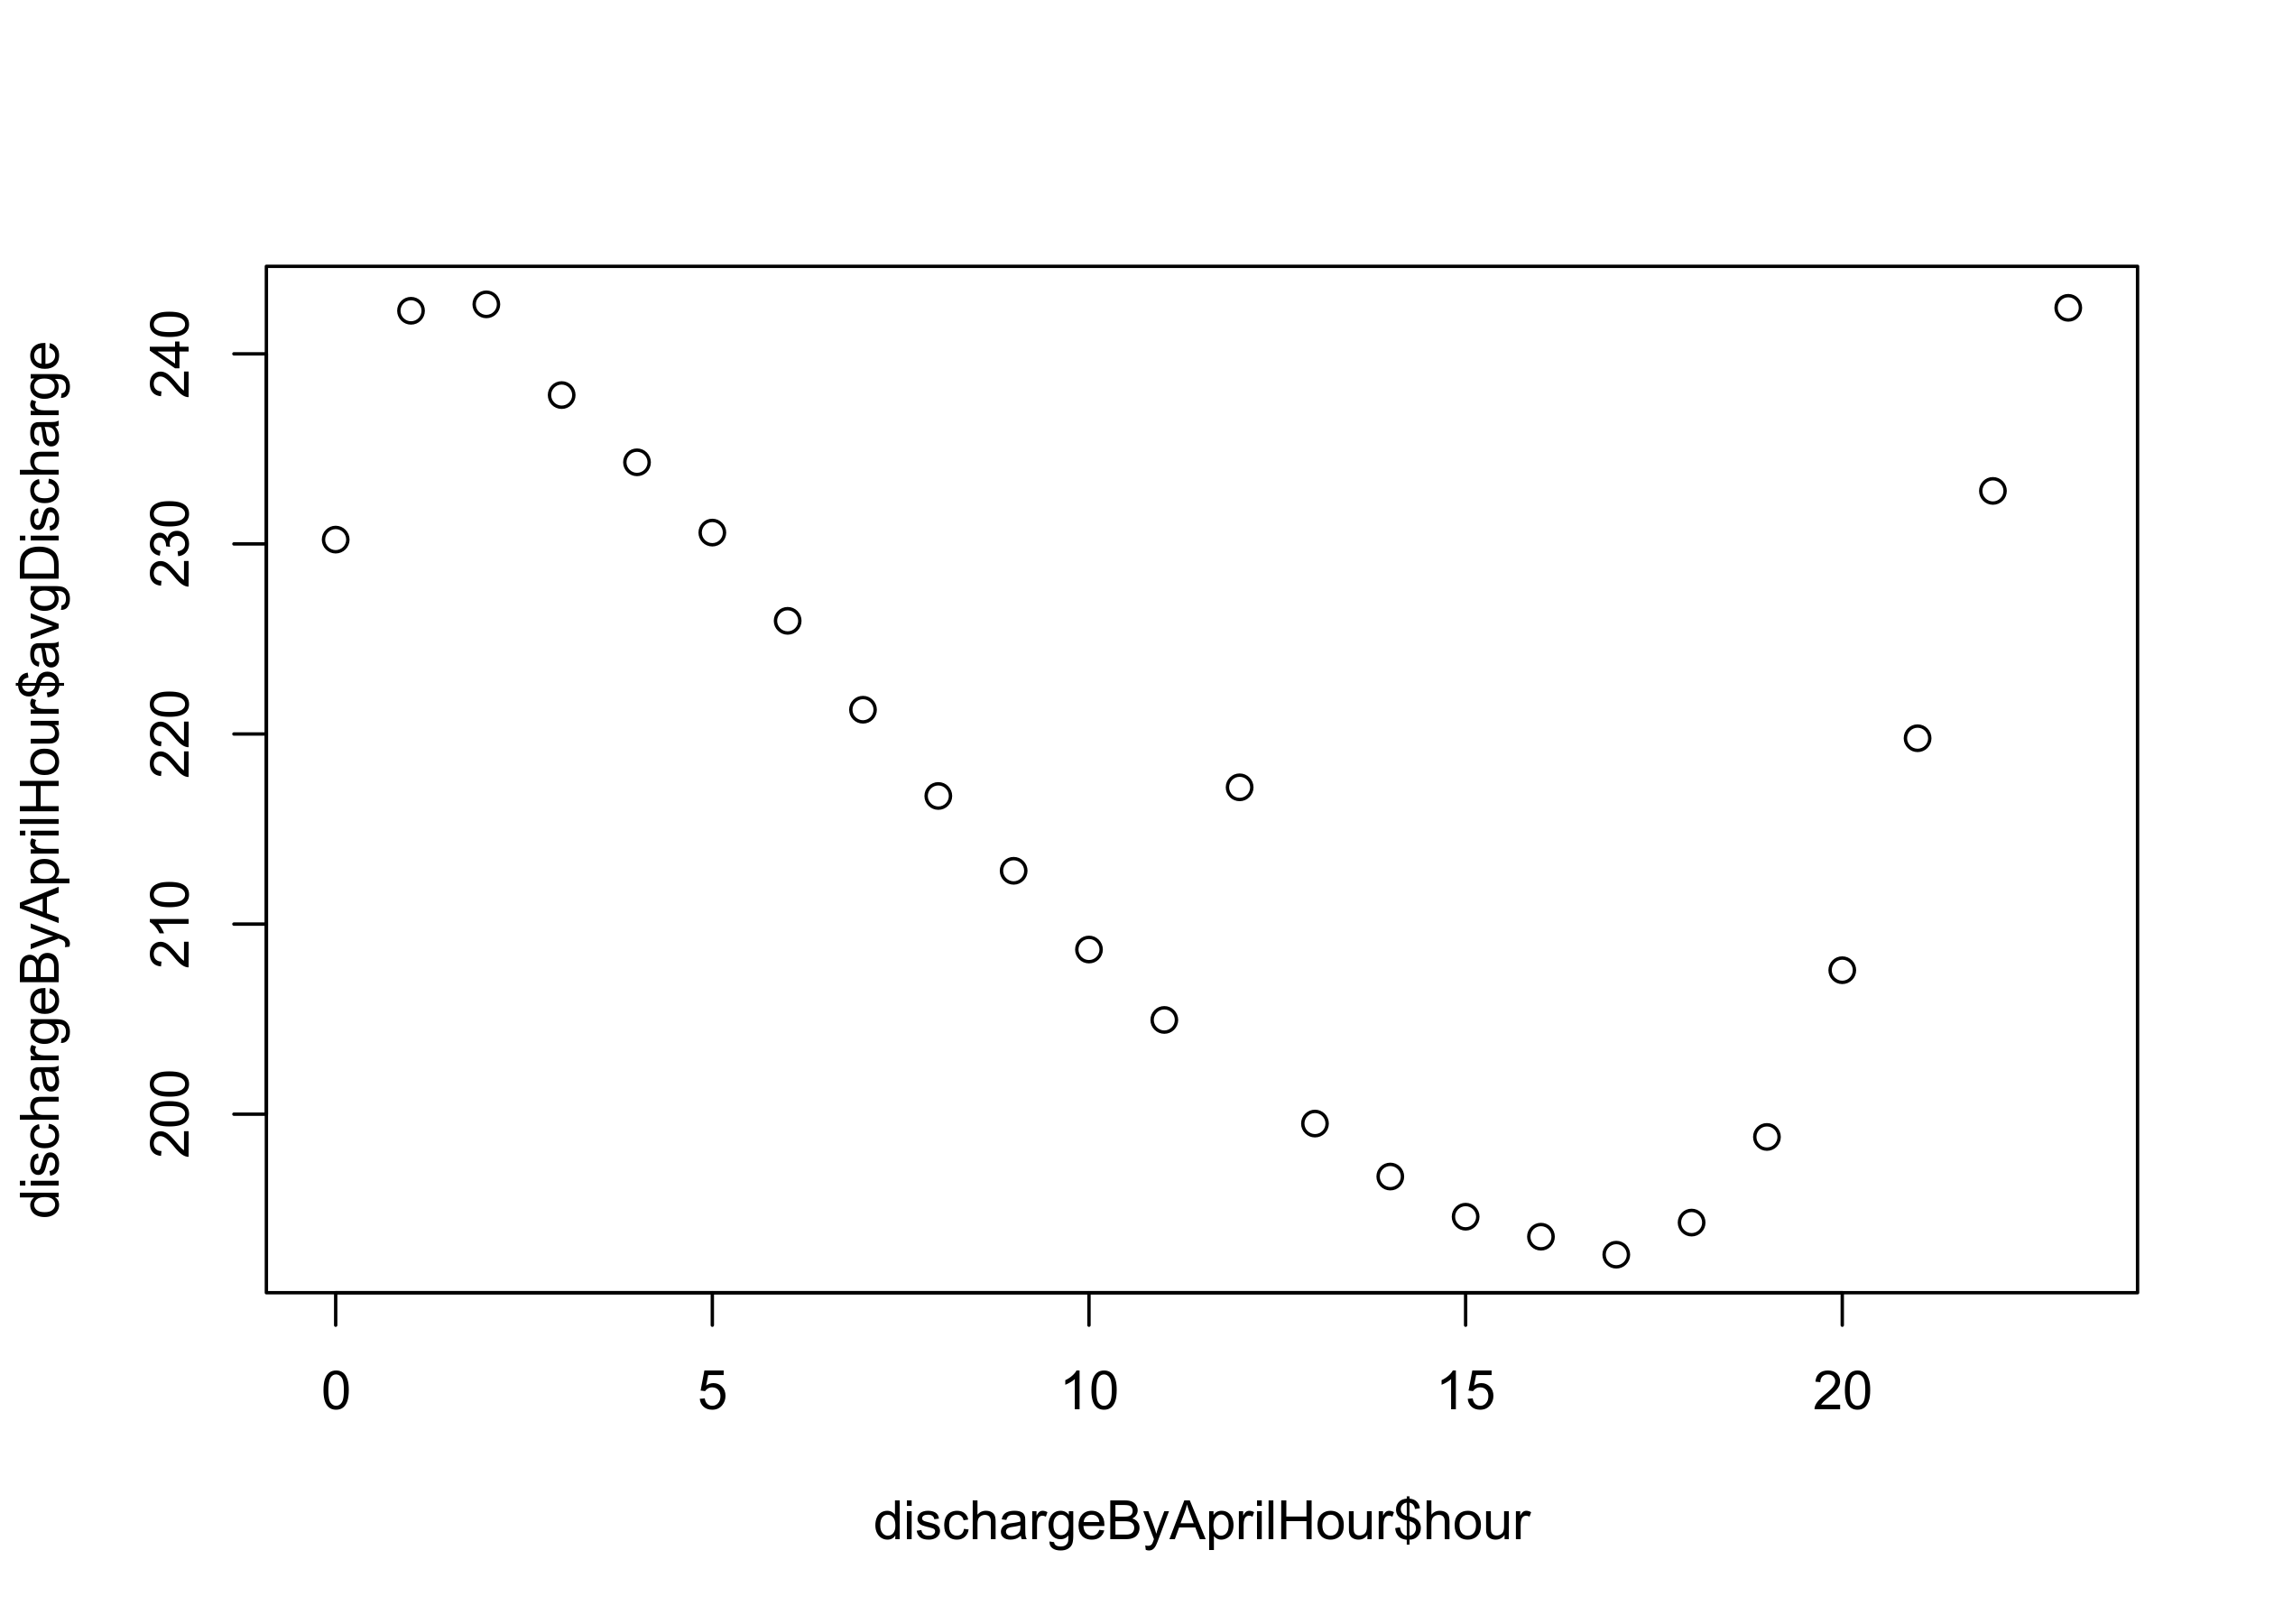 Scatterplot: April Discharge by Hour